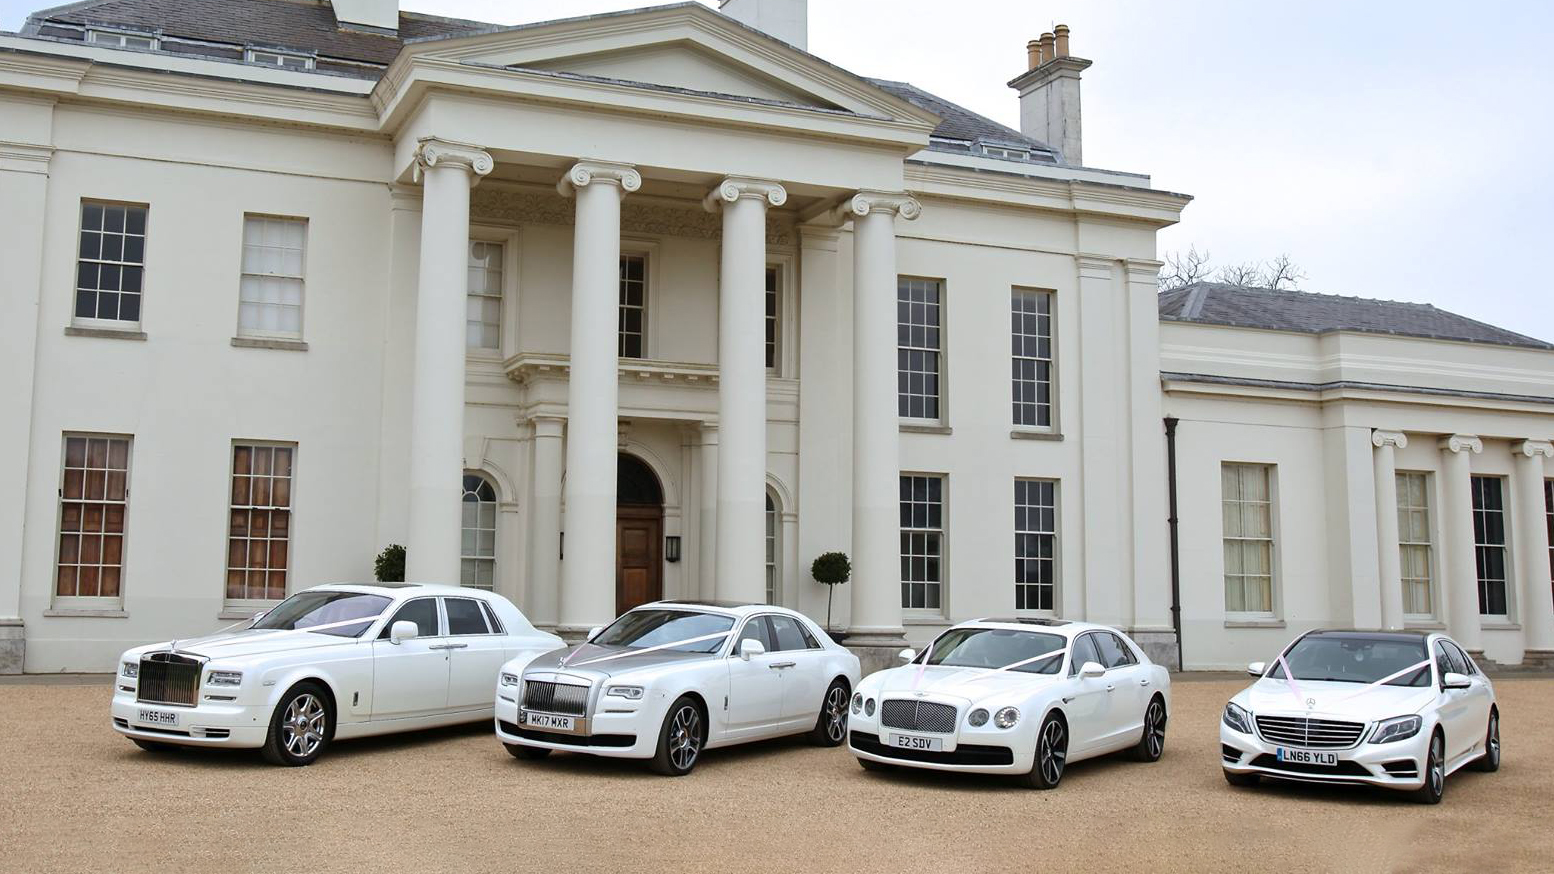 A selection of white Luxurious and modern vehicles all decorated with matching white ribbons on wedding duties in Luton. Frot Left to right: Rolls-Royce Phantom, Rolls-Royce Ghost,